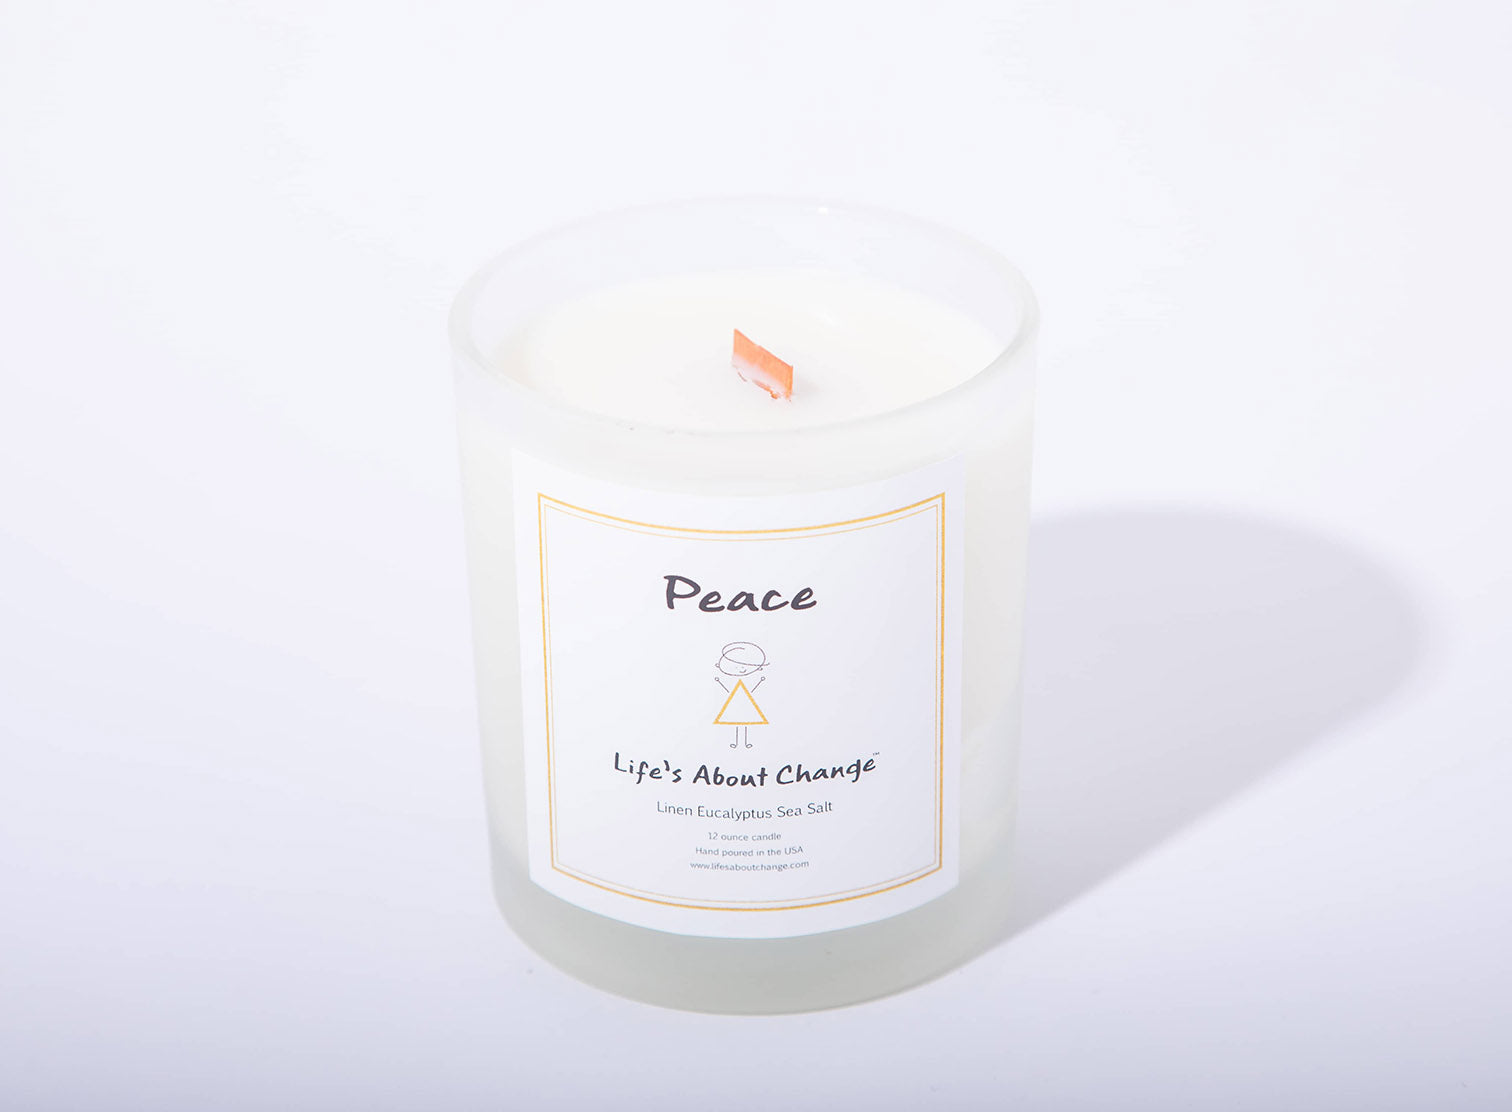 Peace Linen Eucalyptus Sea Salt Candle from Life's About Change Delta Collection